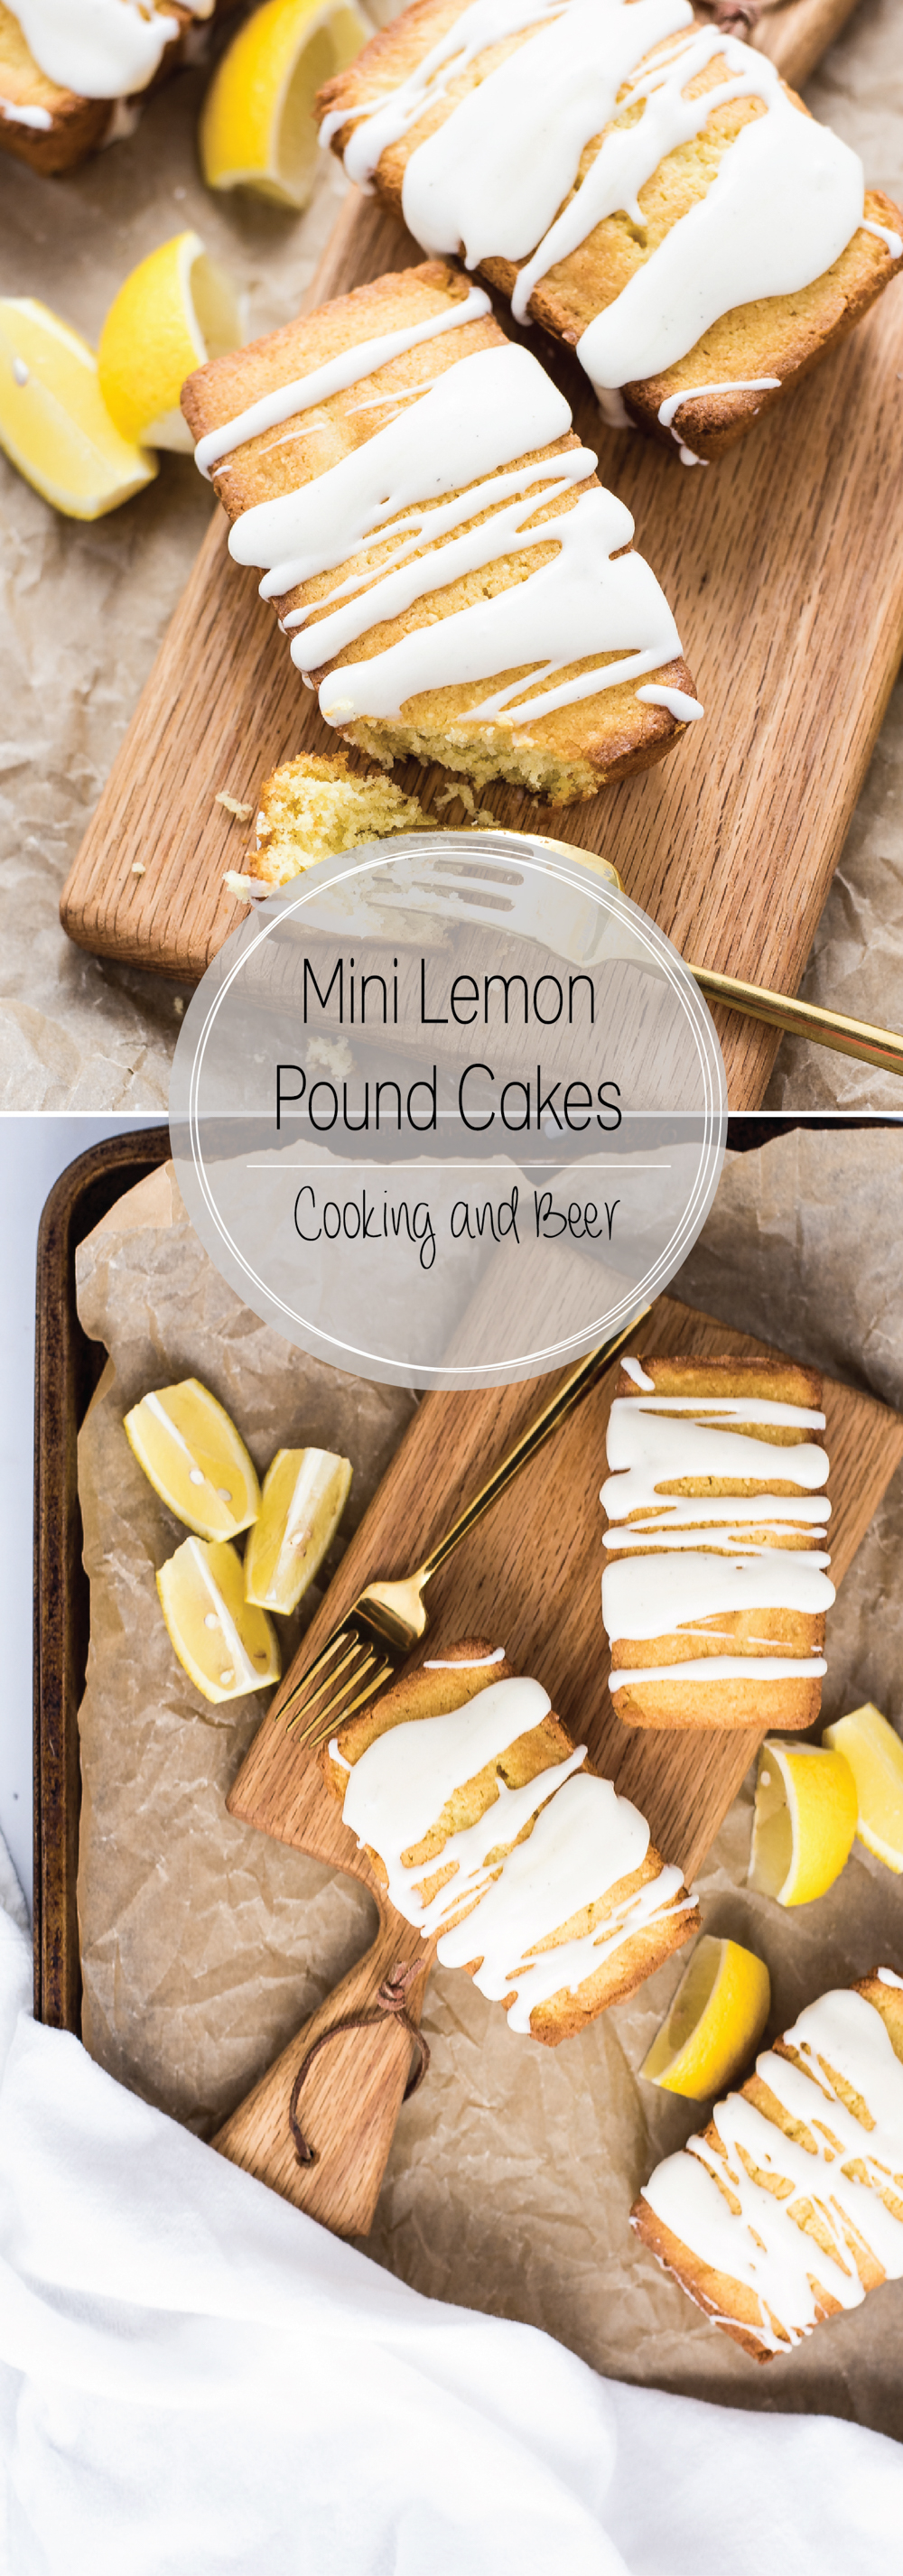 Mini Lemon Pound Cakes are sweet little cakes that can satisfy just about anyone's sweet tooth!